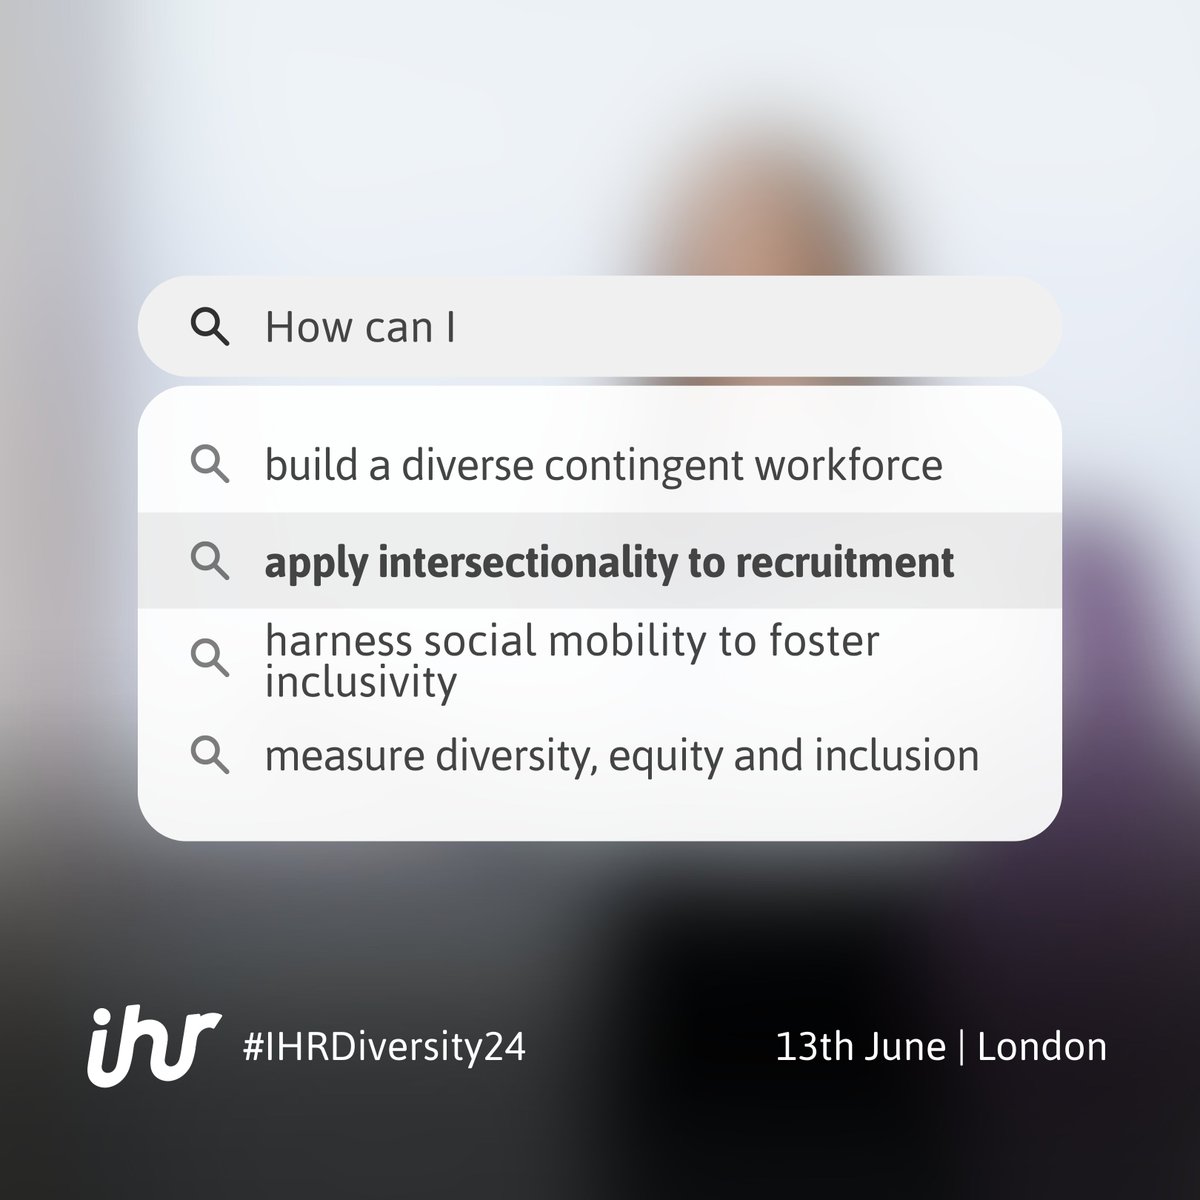 On 13th of June at our Diversity, Equity & Inclusion Conference, you'll find the answers to these questions and more. With just three weeks to go, time's running out to secure your seat at #IHRDiversity24. Register today: hubs.li/Q02s-SzL0